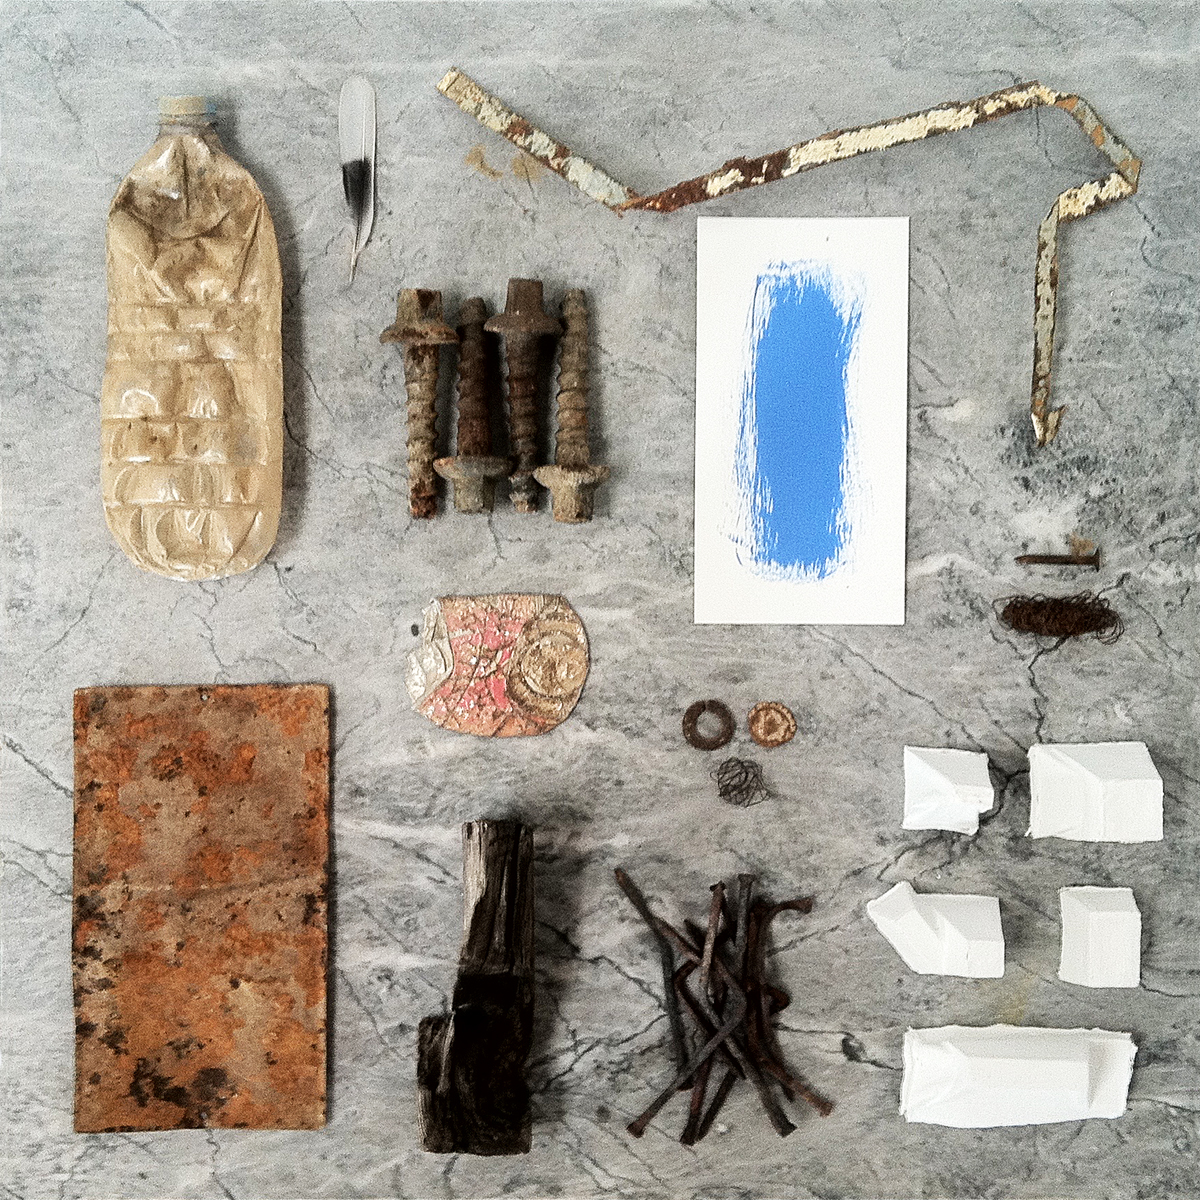 A feather, a blue painting on paper and other objects on a grey marble table.